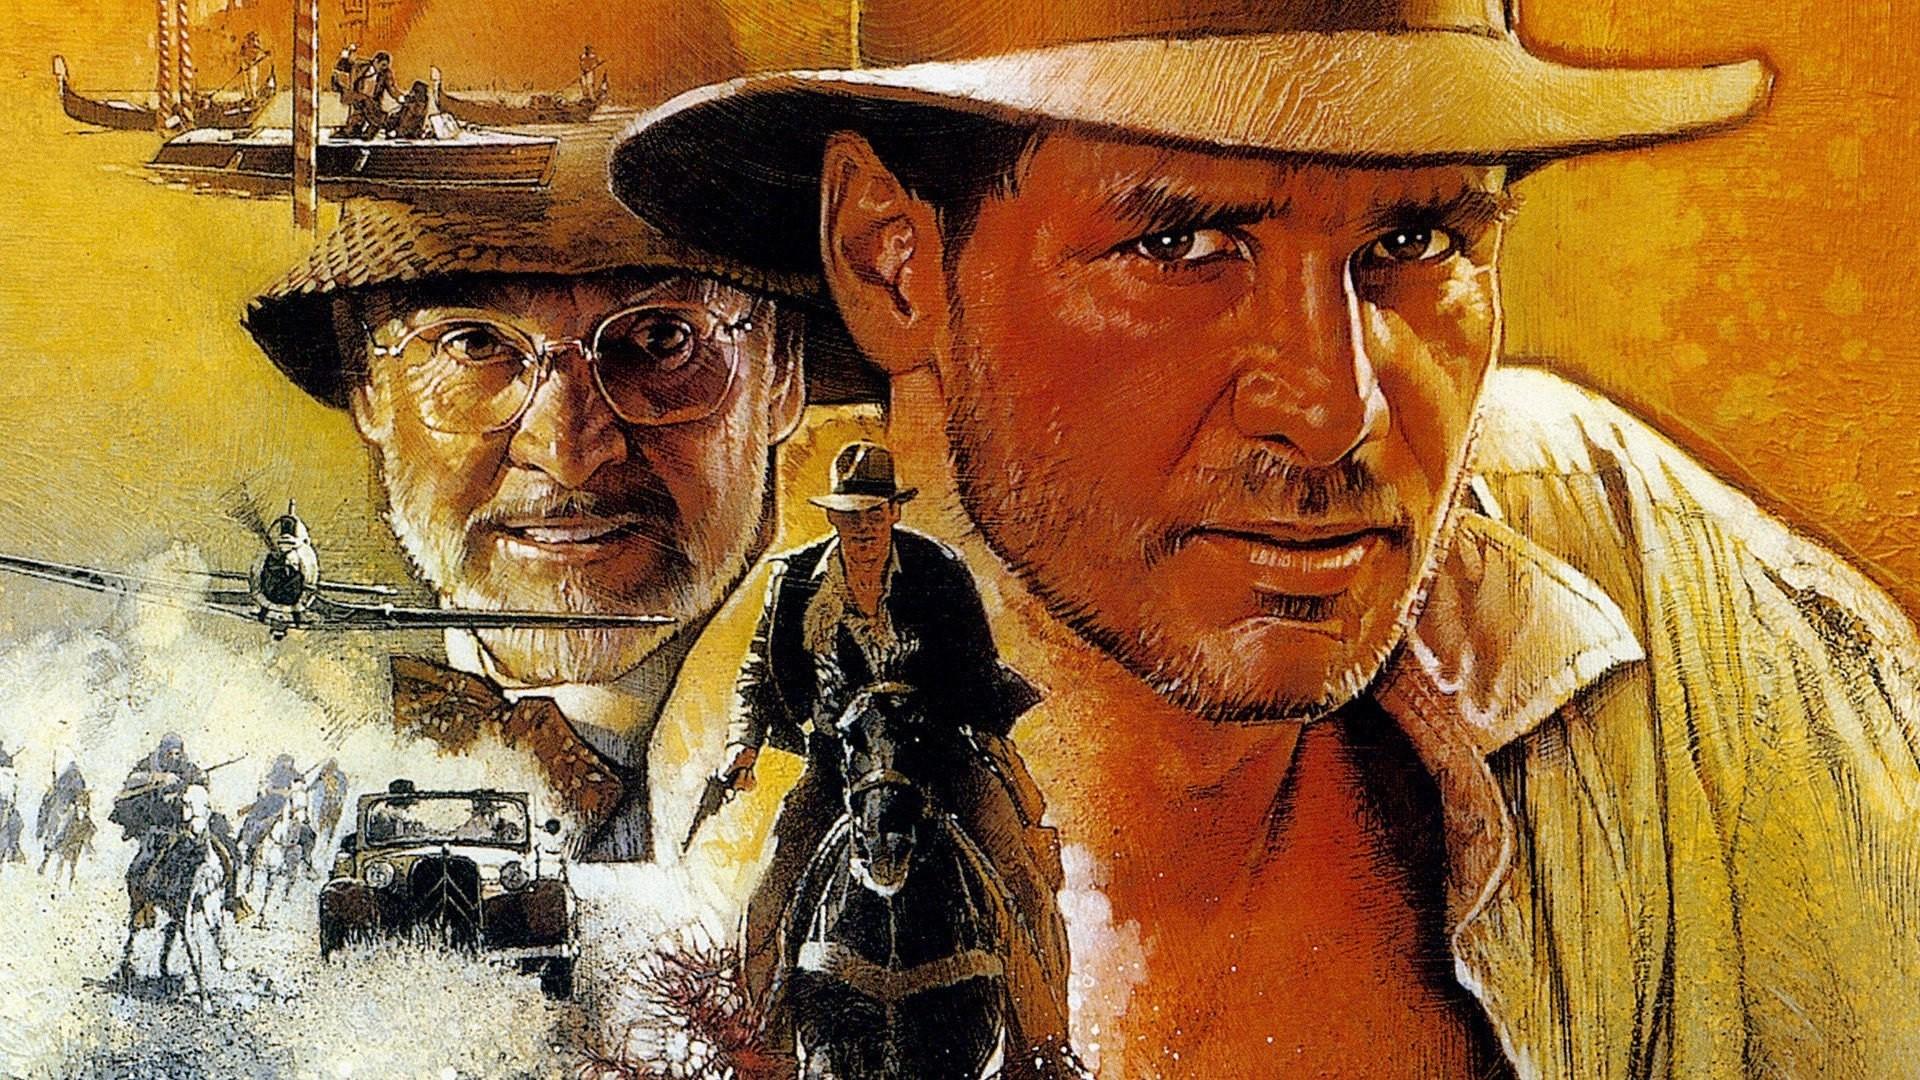 Indiana Jones and The Last Crusade Knight HD Wallpaper, Background